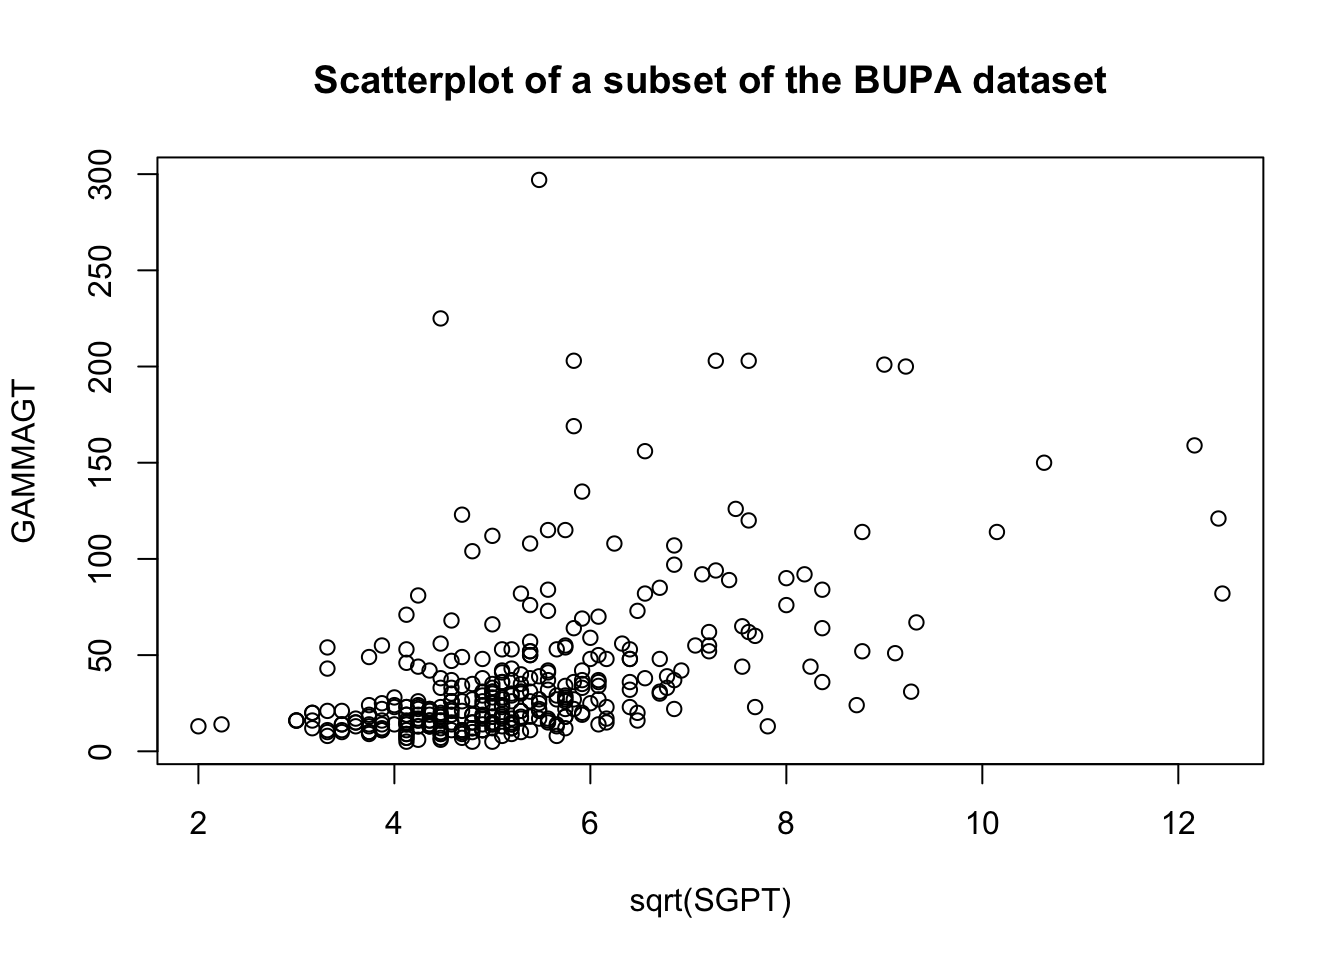 Various data transformations for a subset of the BUPA liver diease dataset.